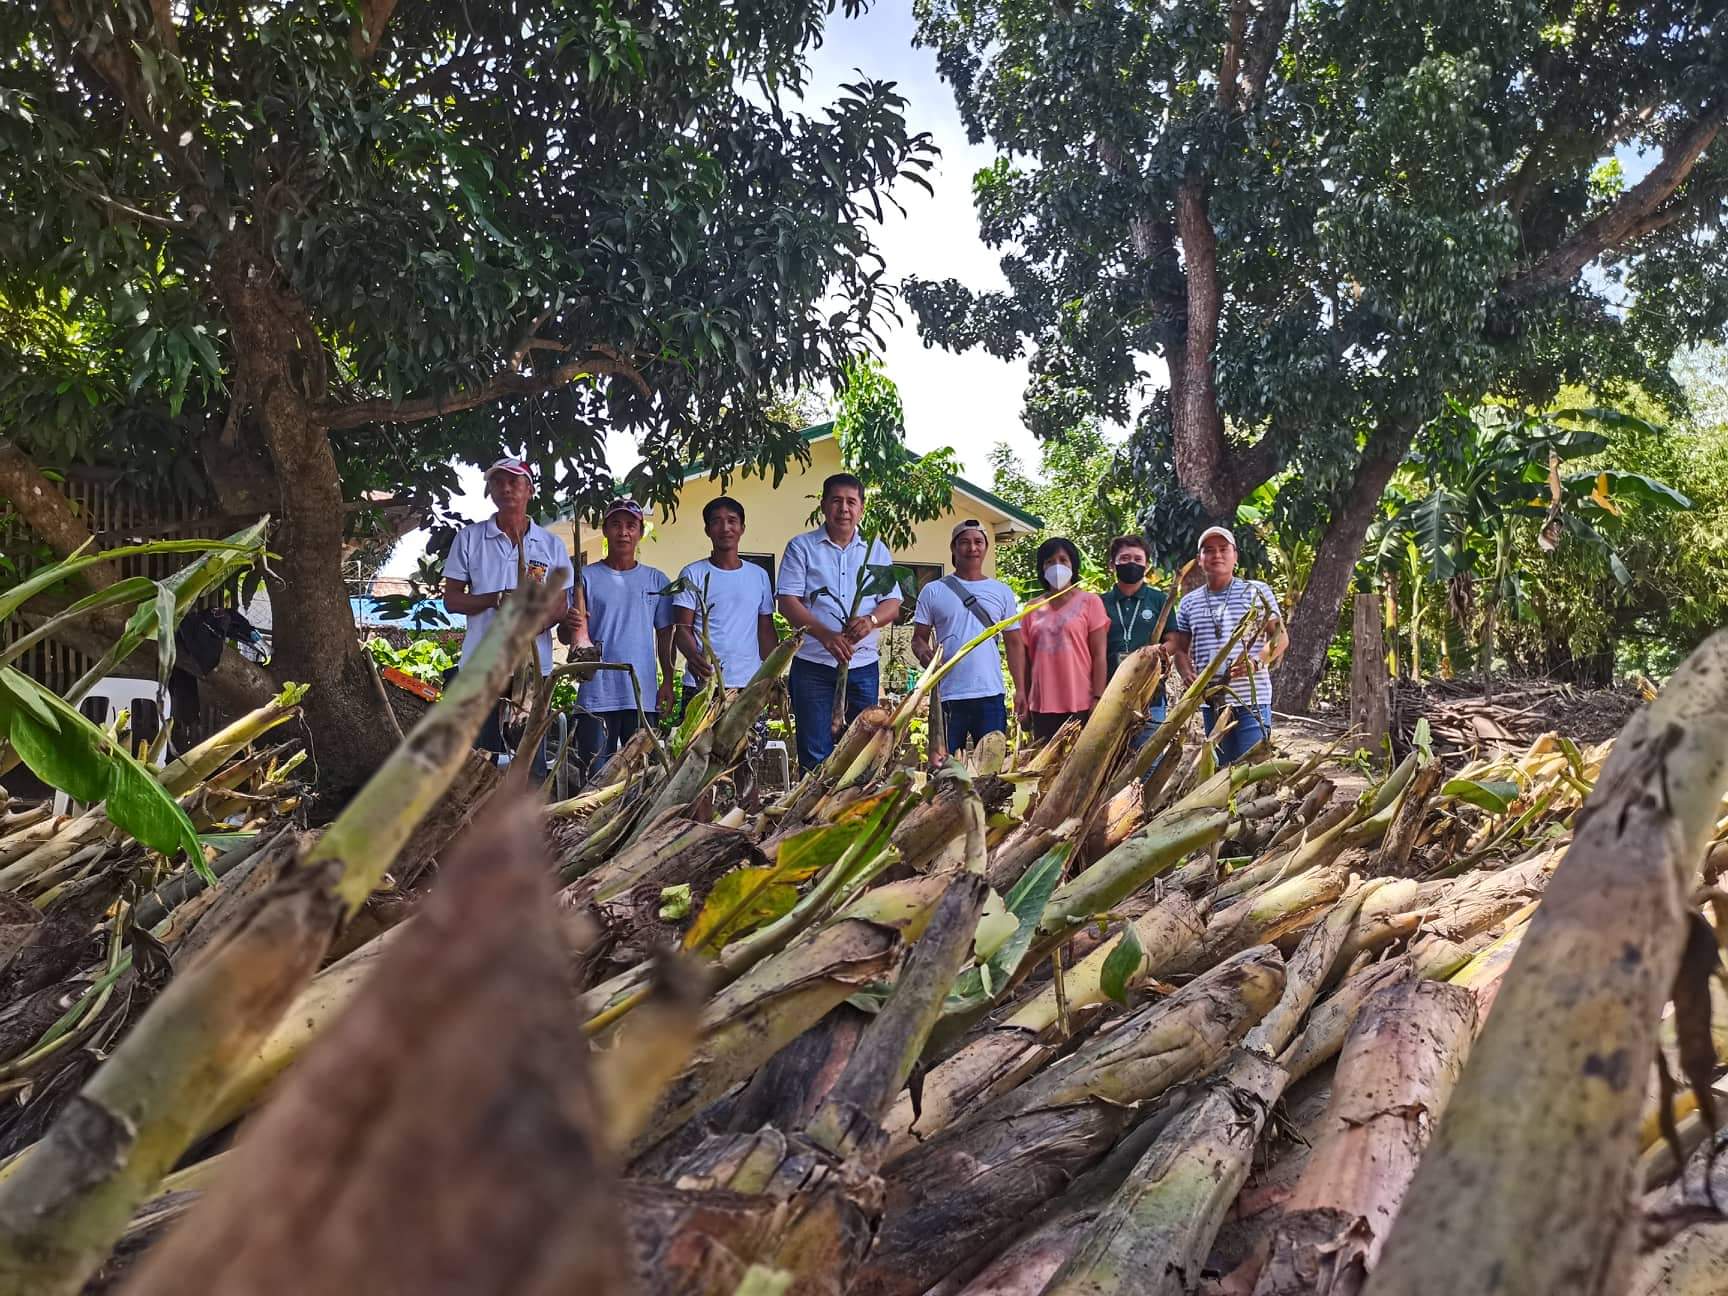 Banana planting materials awarded to five farmer groups in OccMin